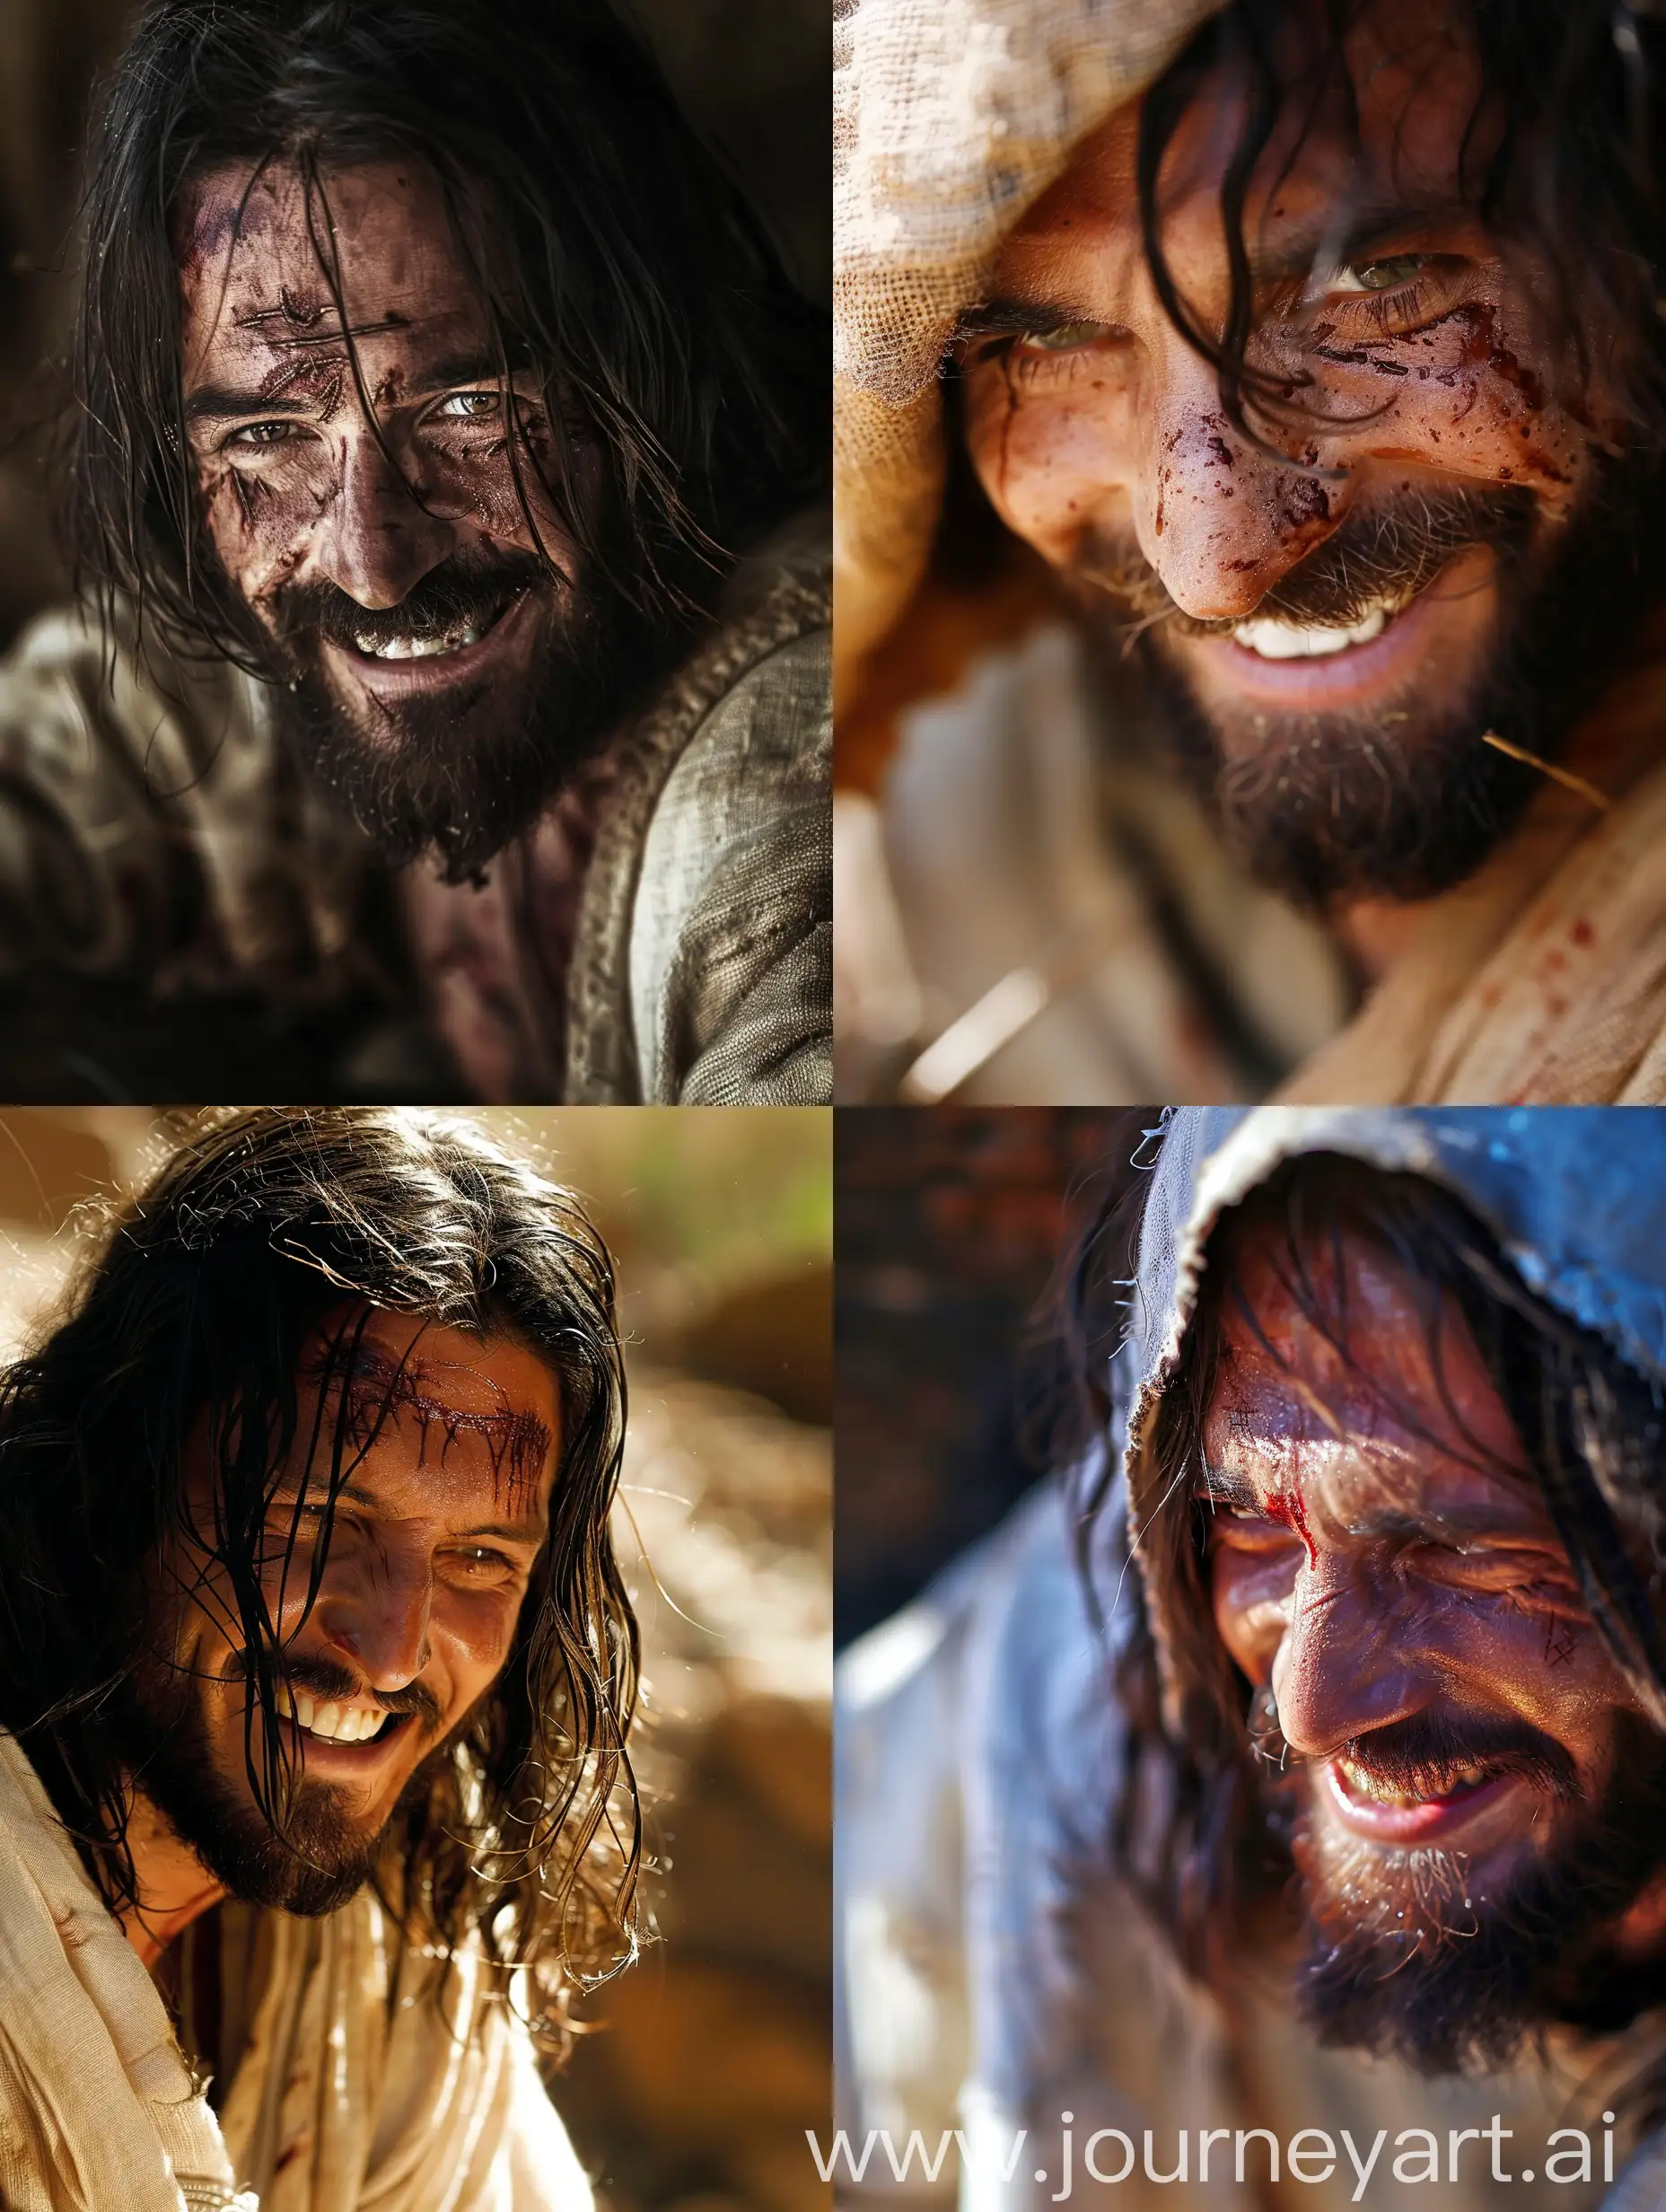 Smiling-Jesus-with-Wounded-Expression-in-34-Aspect-Ratio-Art